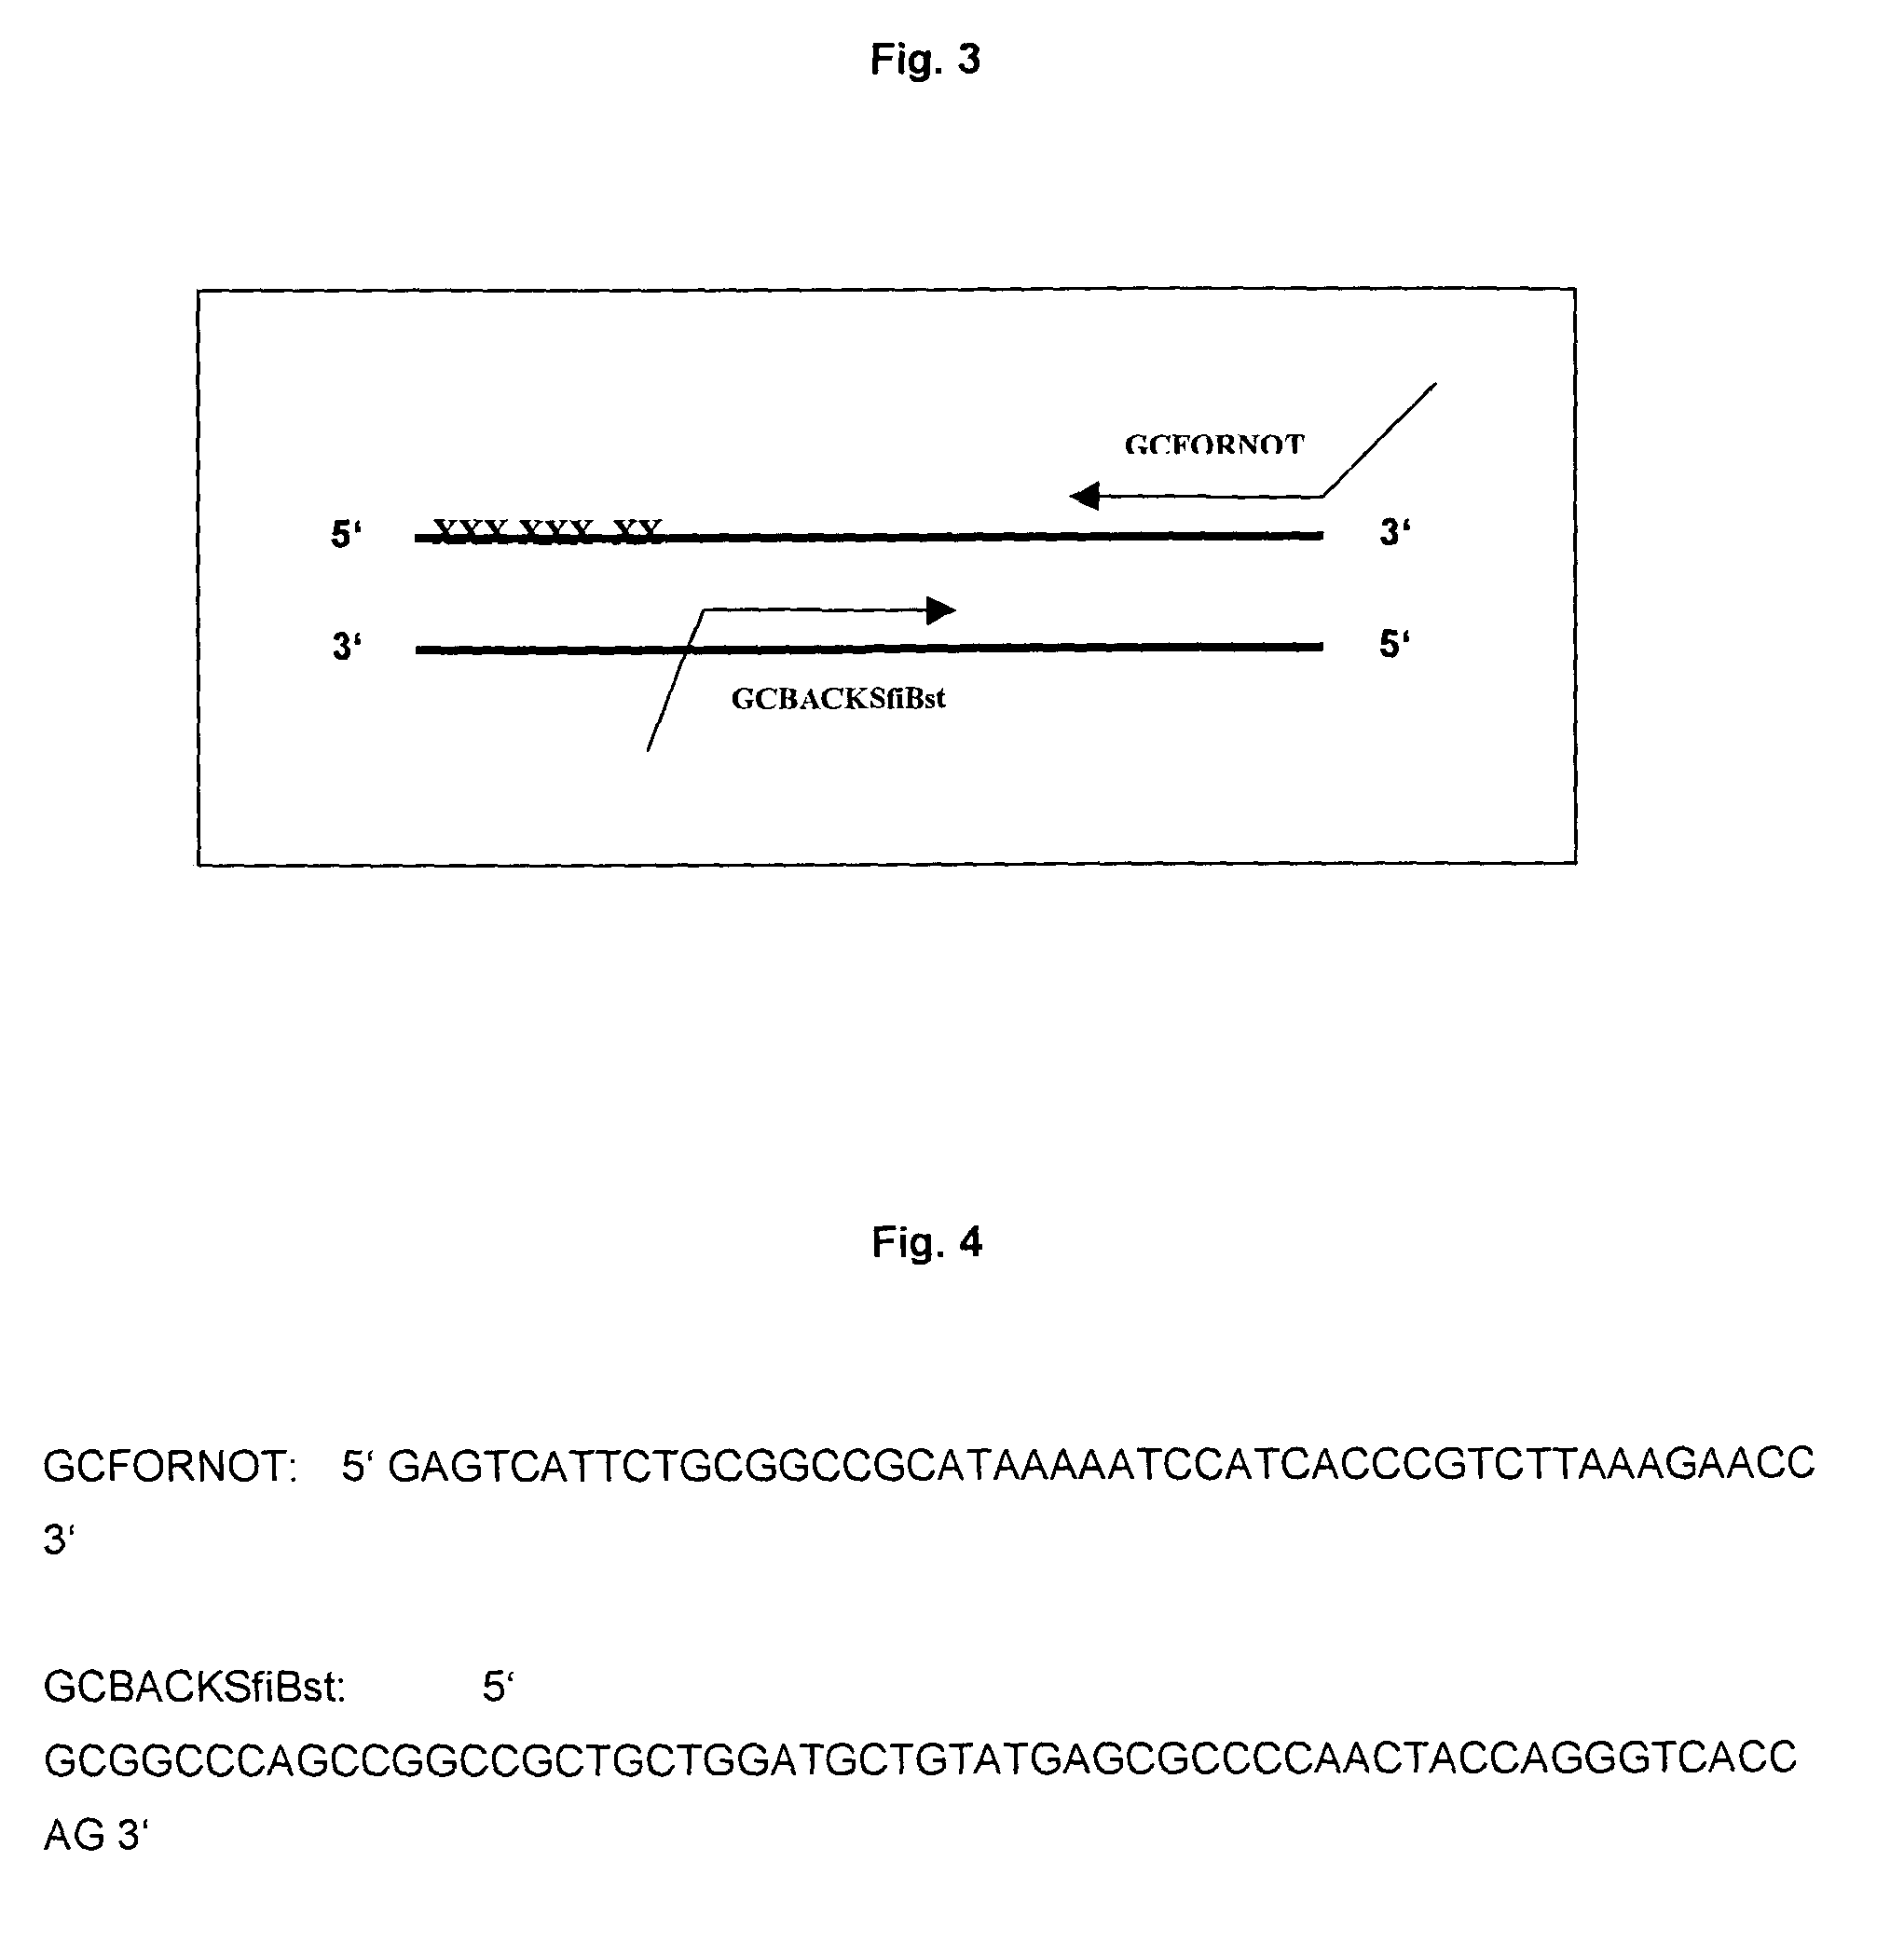 Fabrication of beta-pleated sheet proteins with specific binding properties